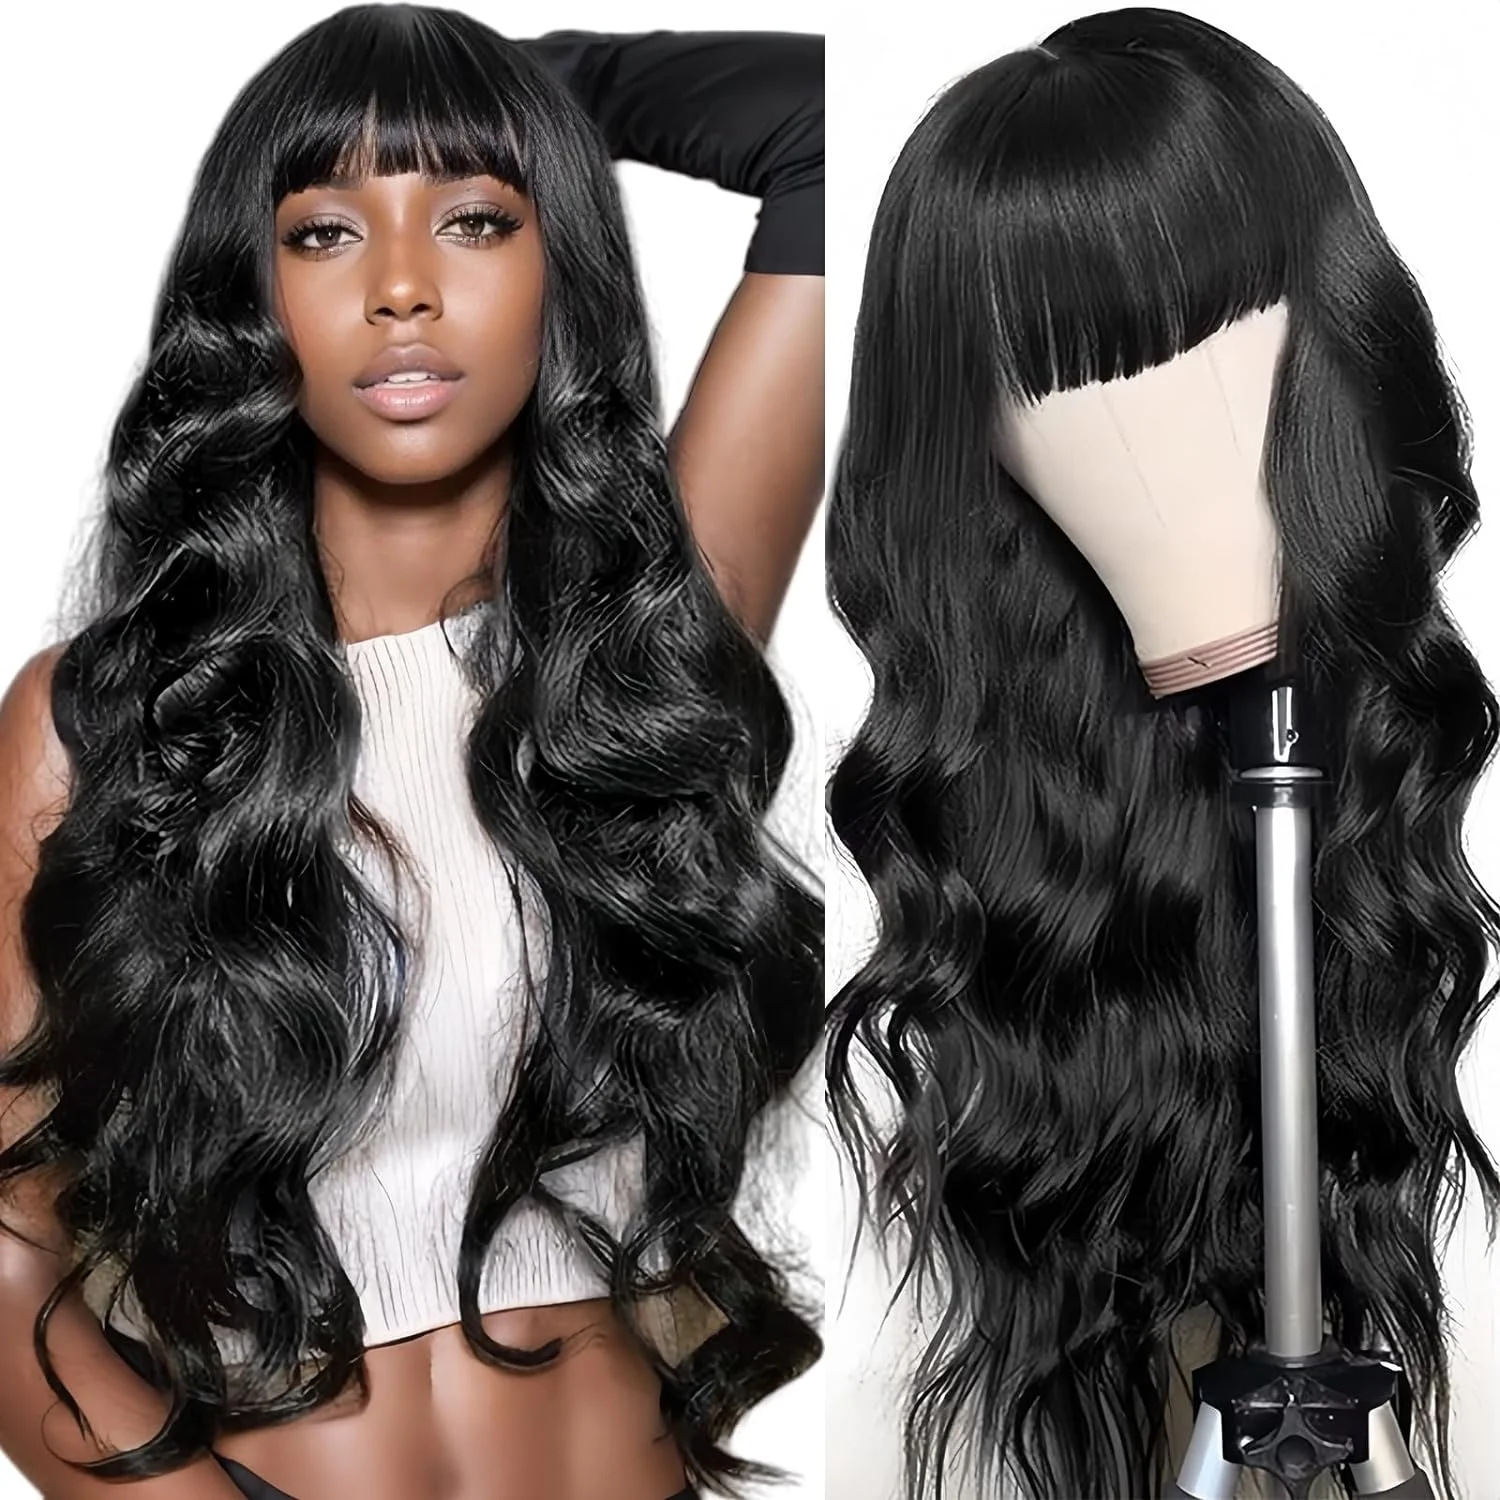 

Body Wave Wigs Human Hair With Bangs Ready to Wear and Go Glueless Machine Made Wig 100% Brazilian Virgin Human Hair for Women